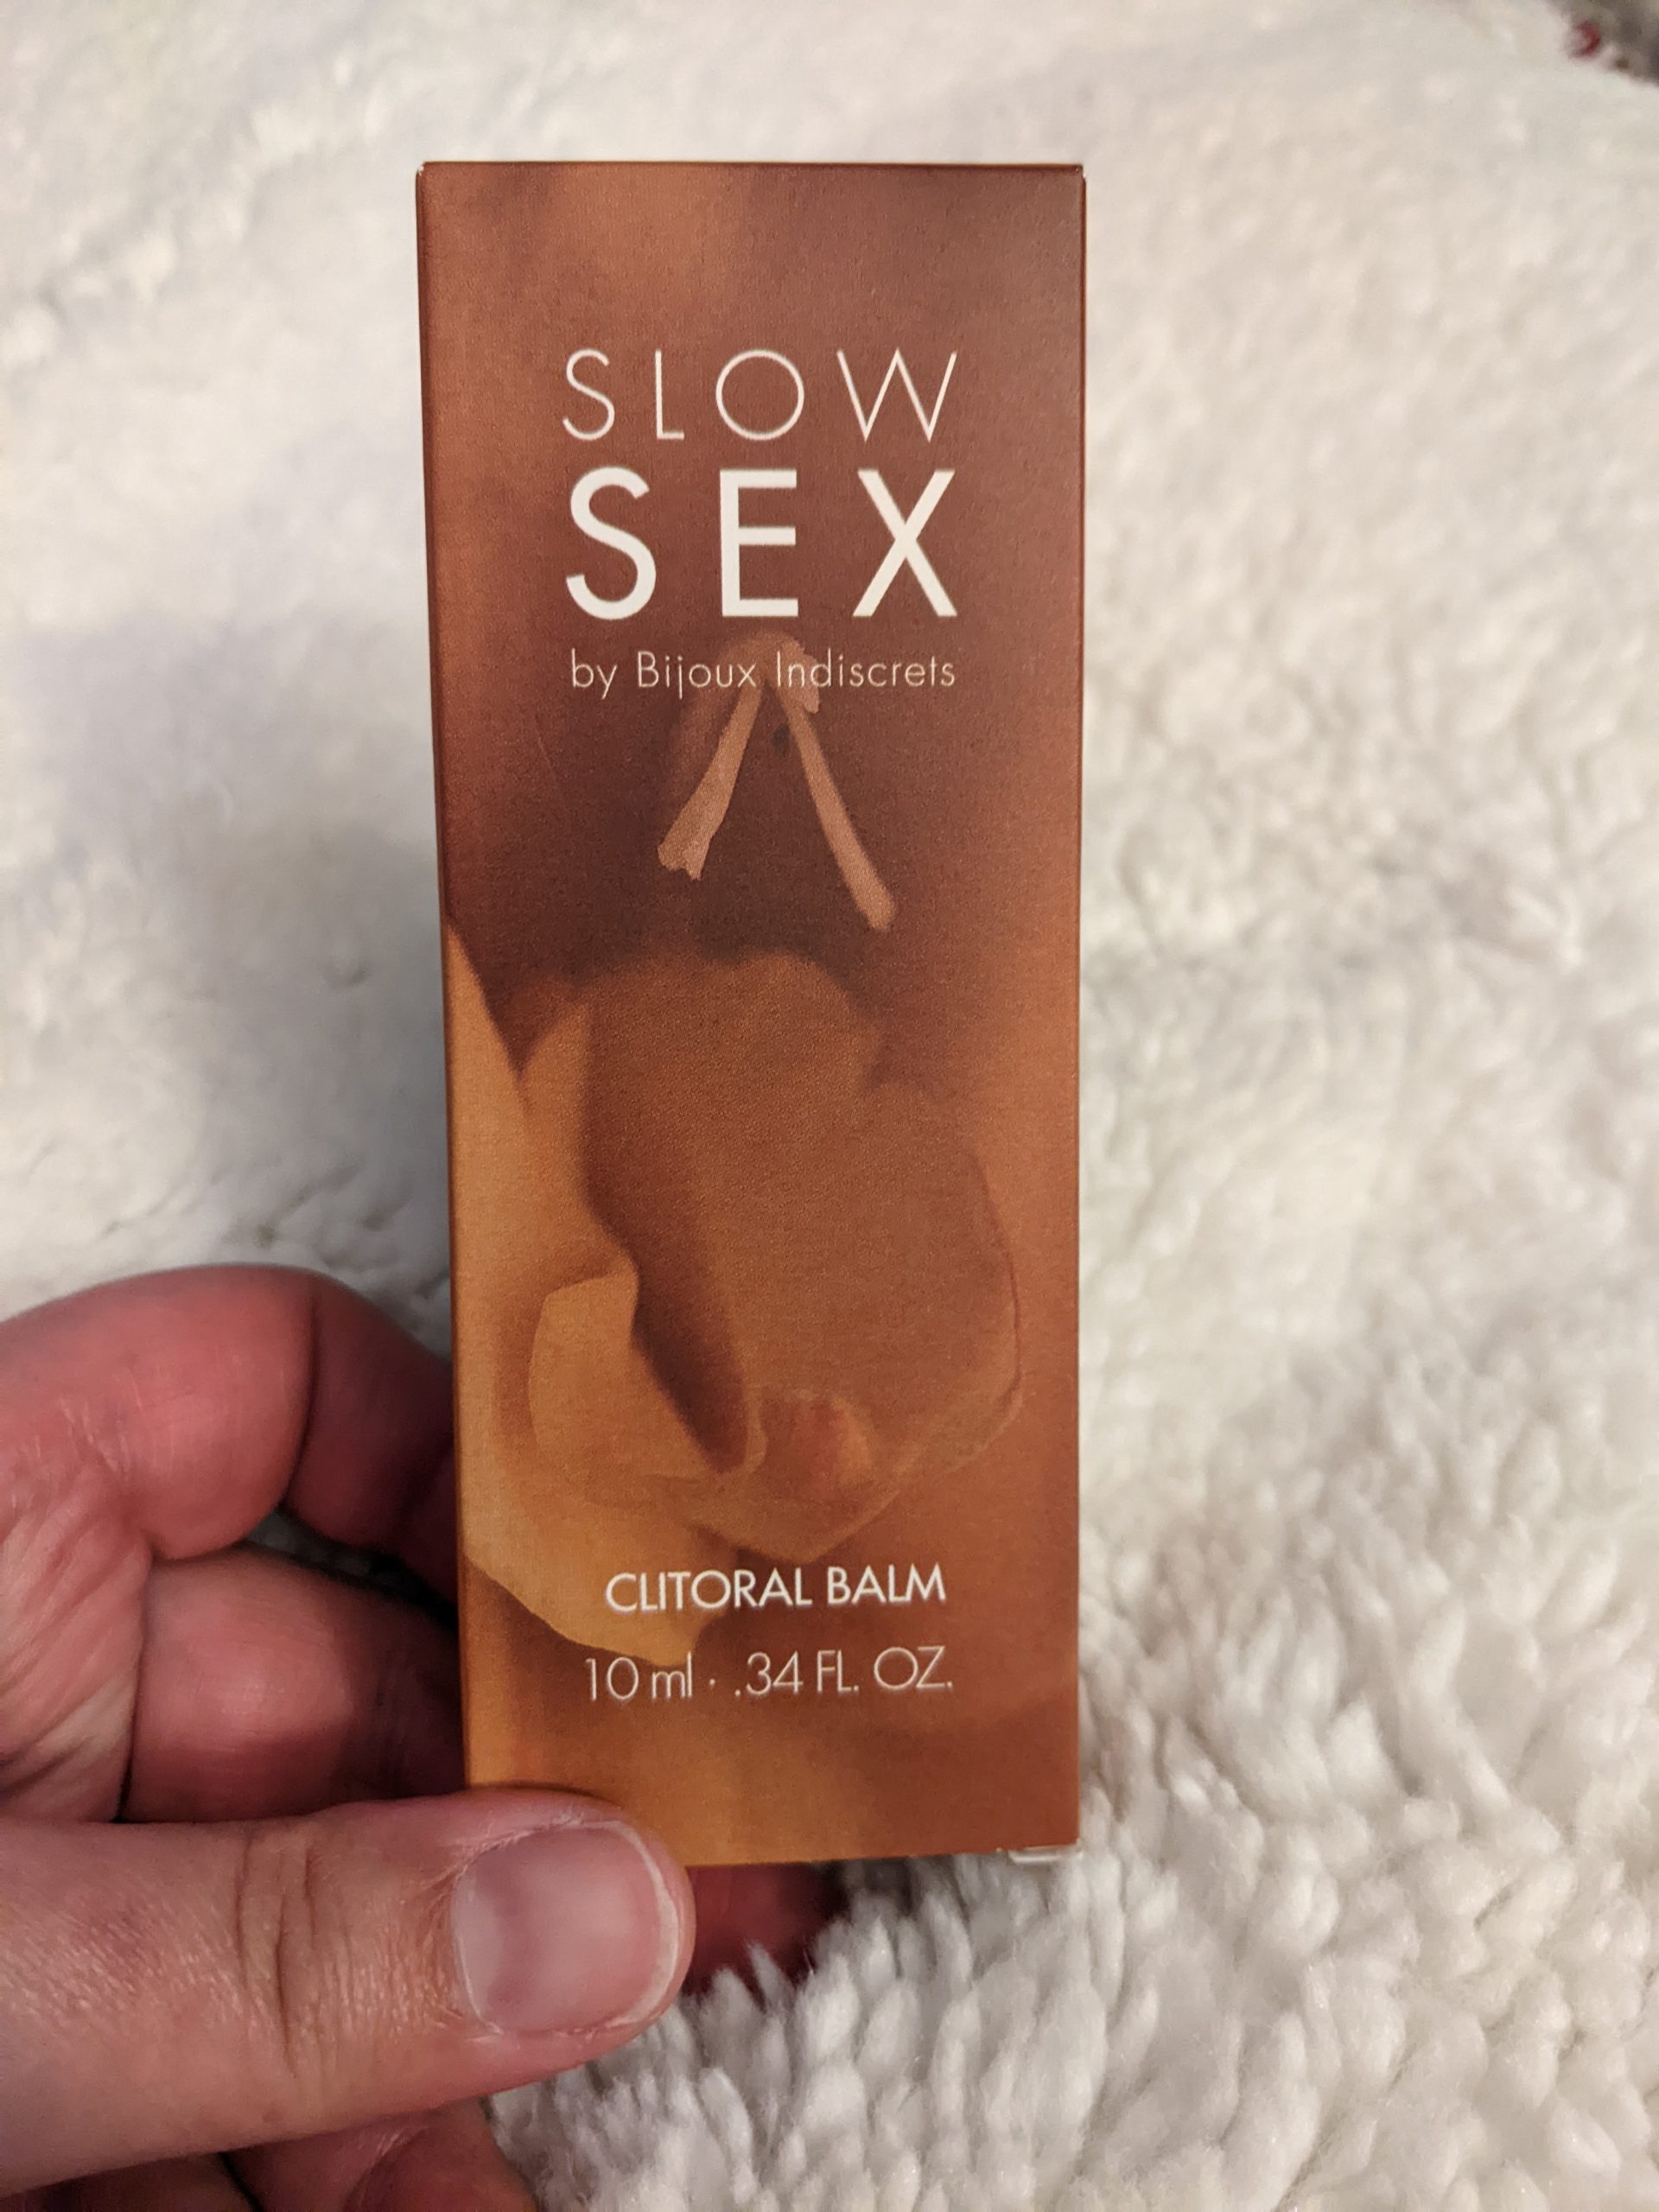 Slow sex outer box